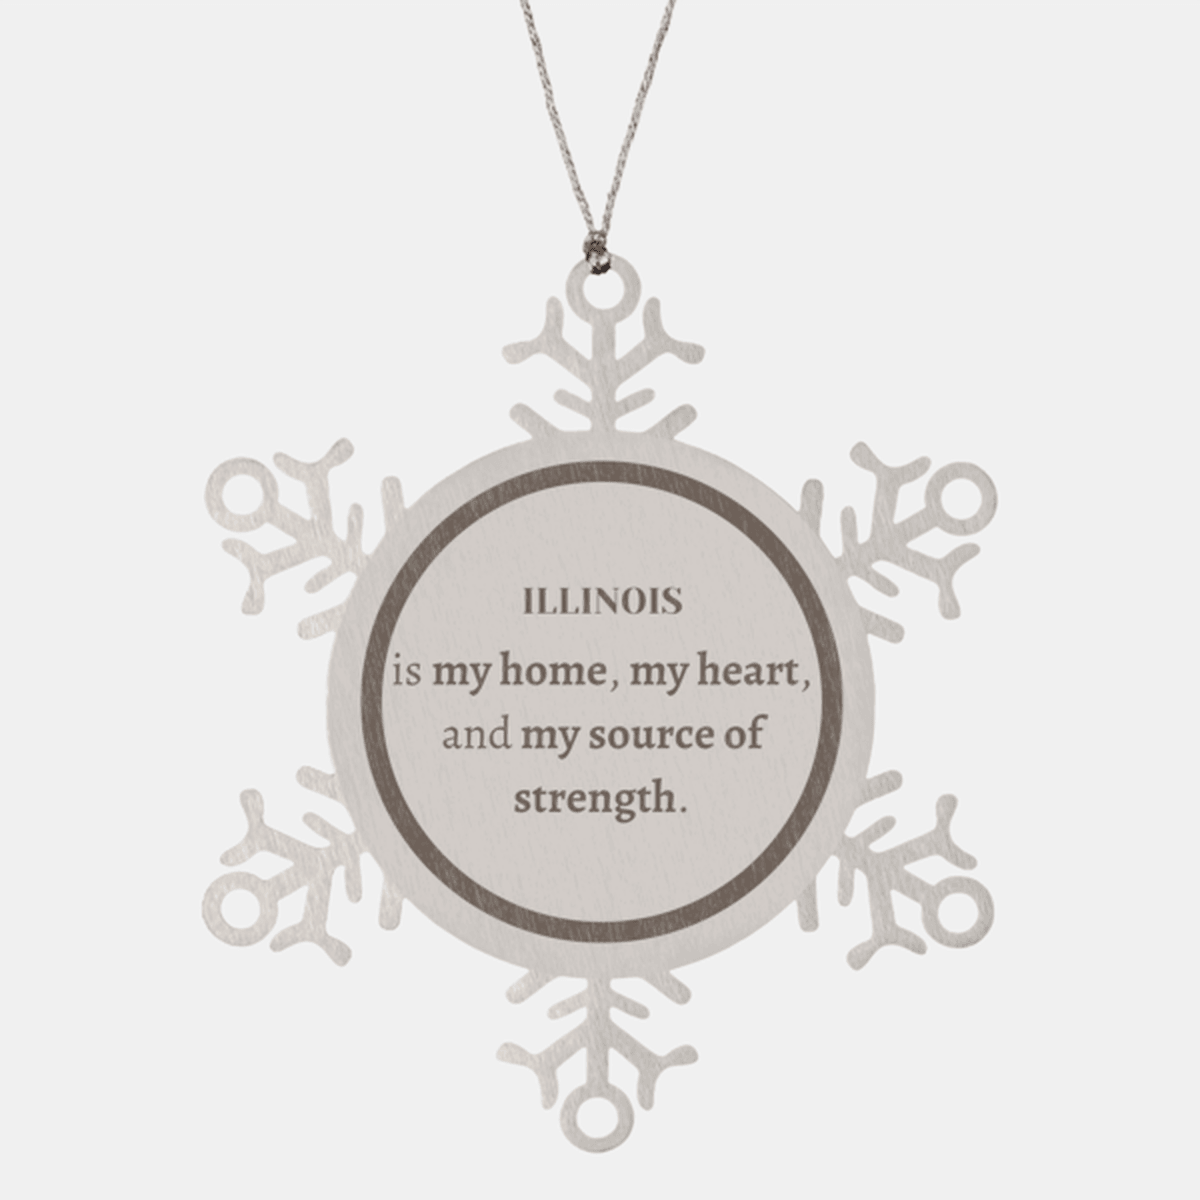 Illinois is my home Gifts, Lovely Illinois Birthday Christmas Snowflake Ornament For People from Illinois, Men, Women, Friends - Mallard Moon Gift Shop